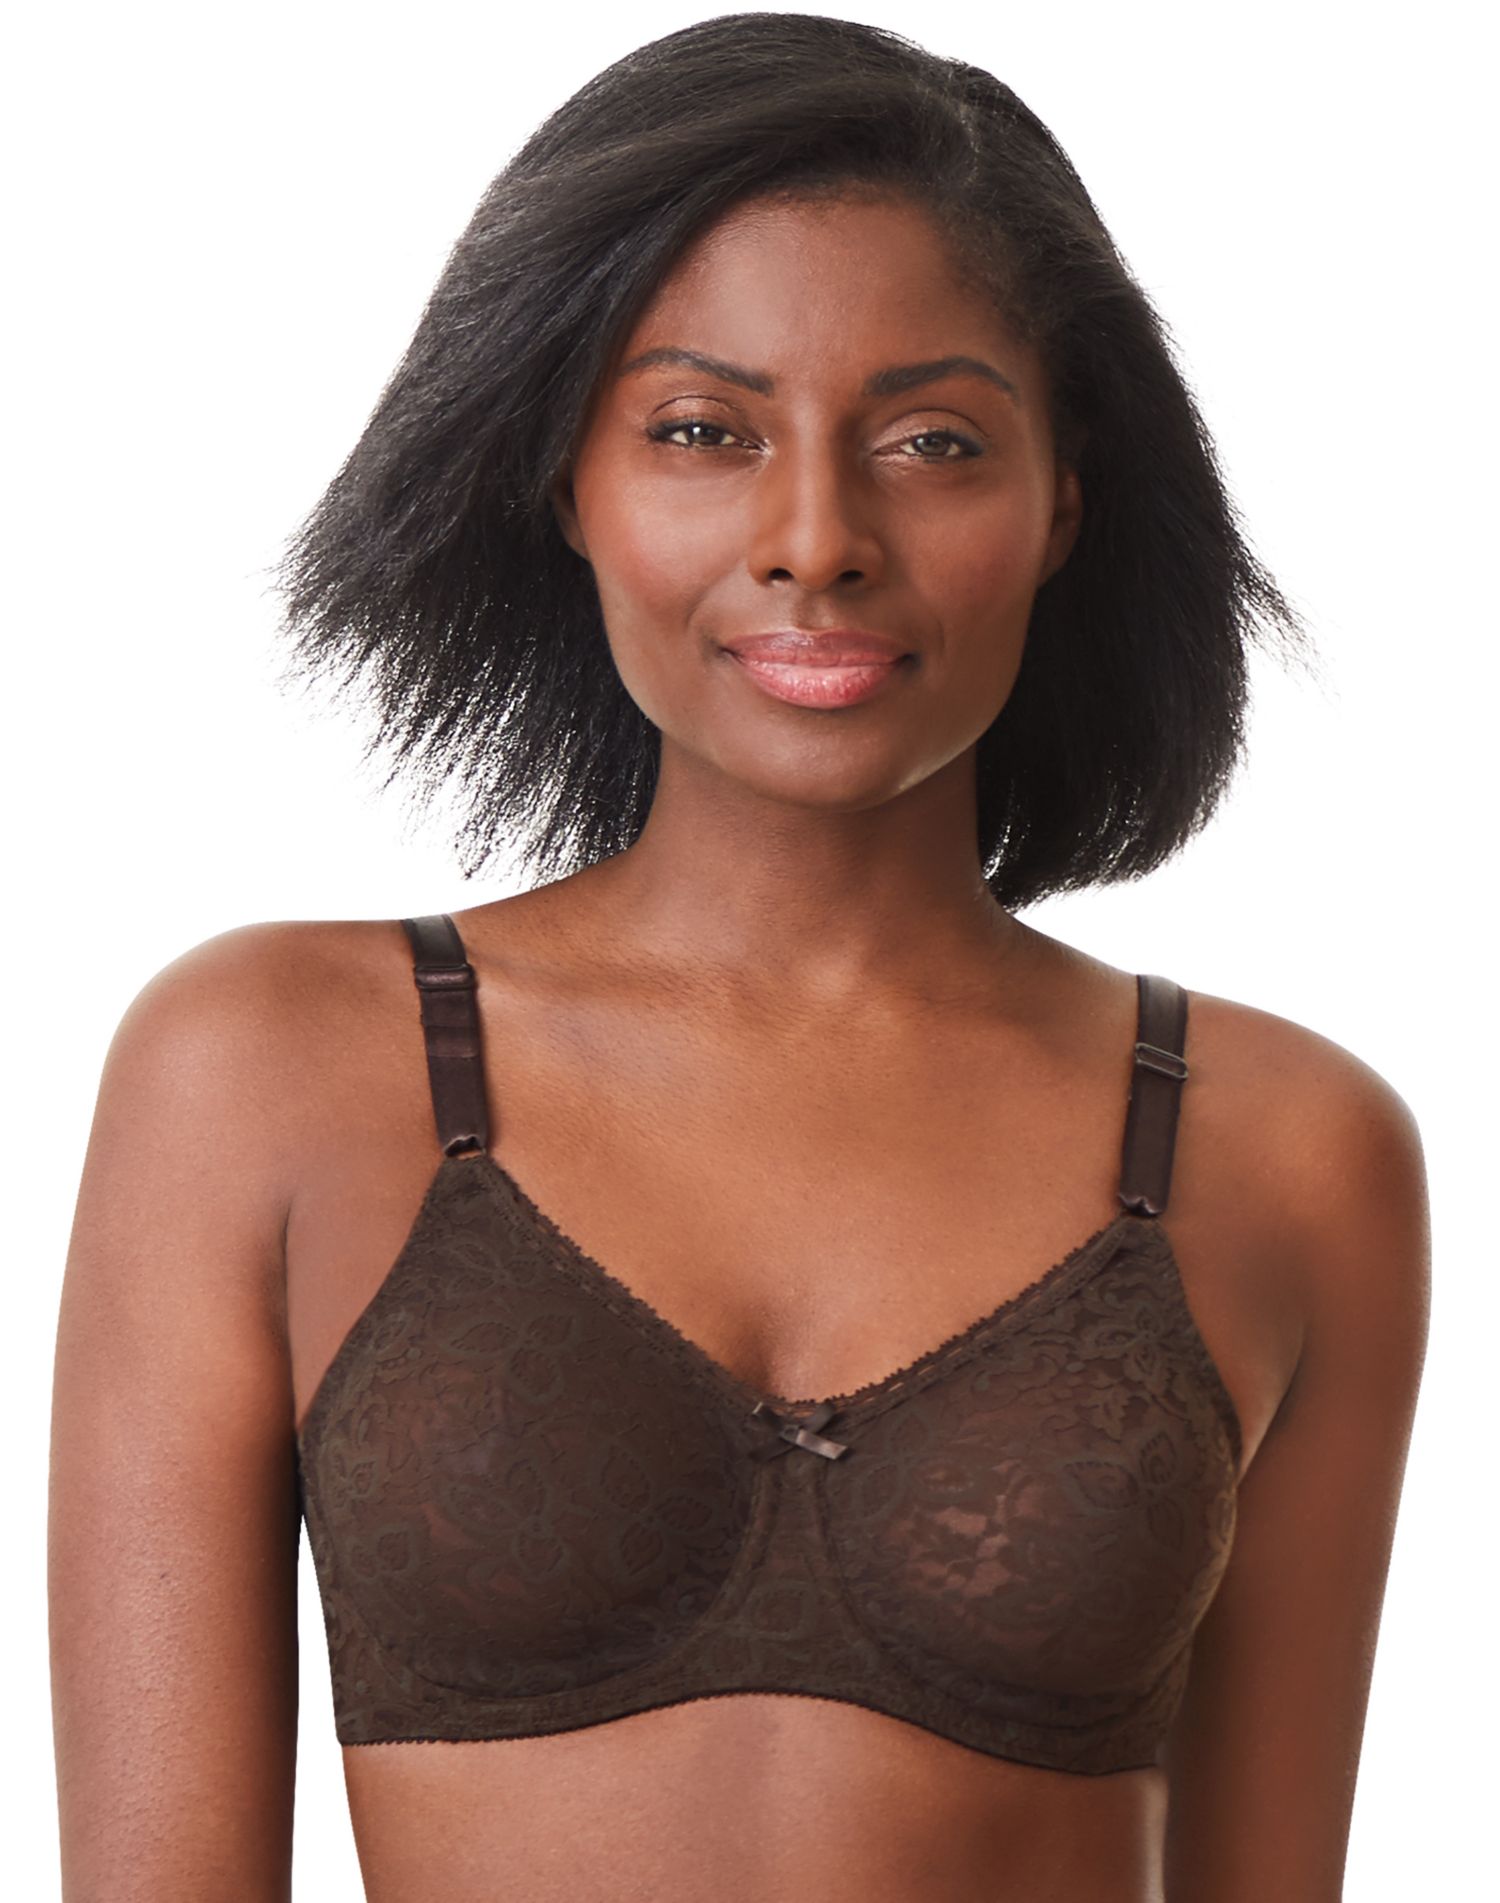 Bali Women's Lace and Smooth Underwire, Hush Pink/White Cross Dye